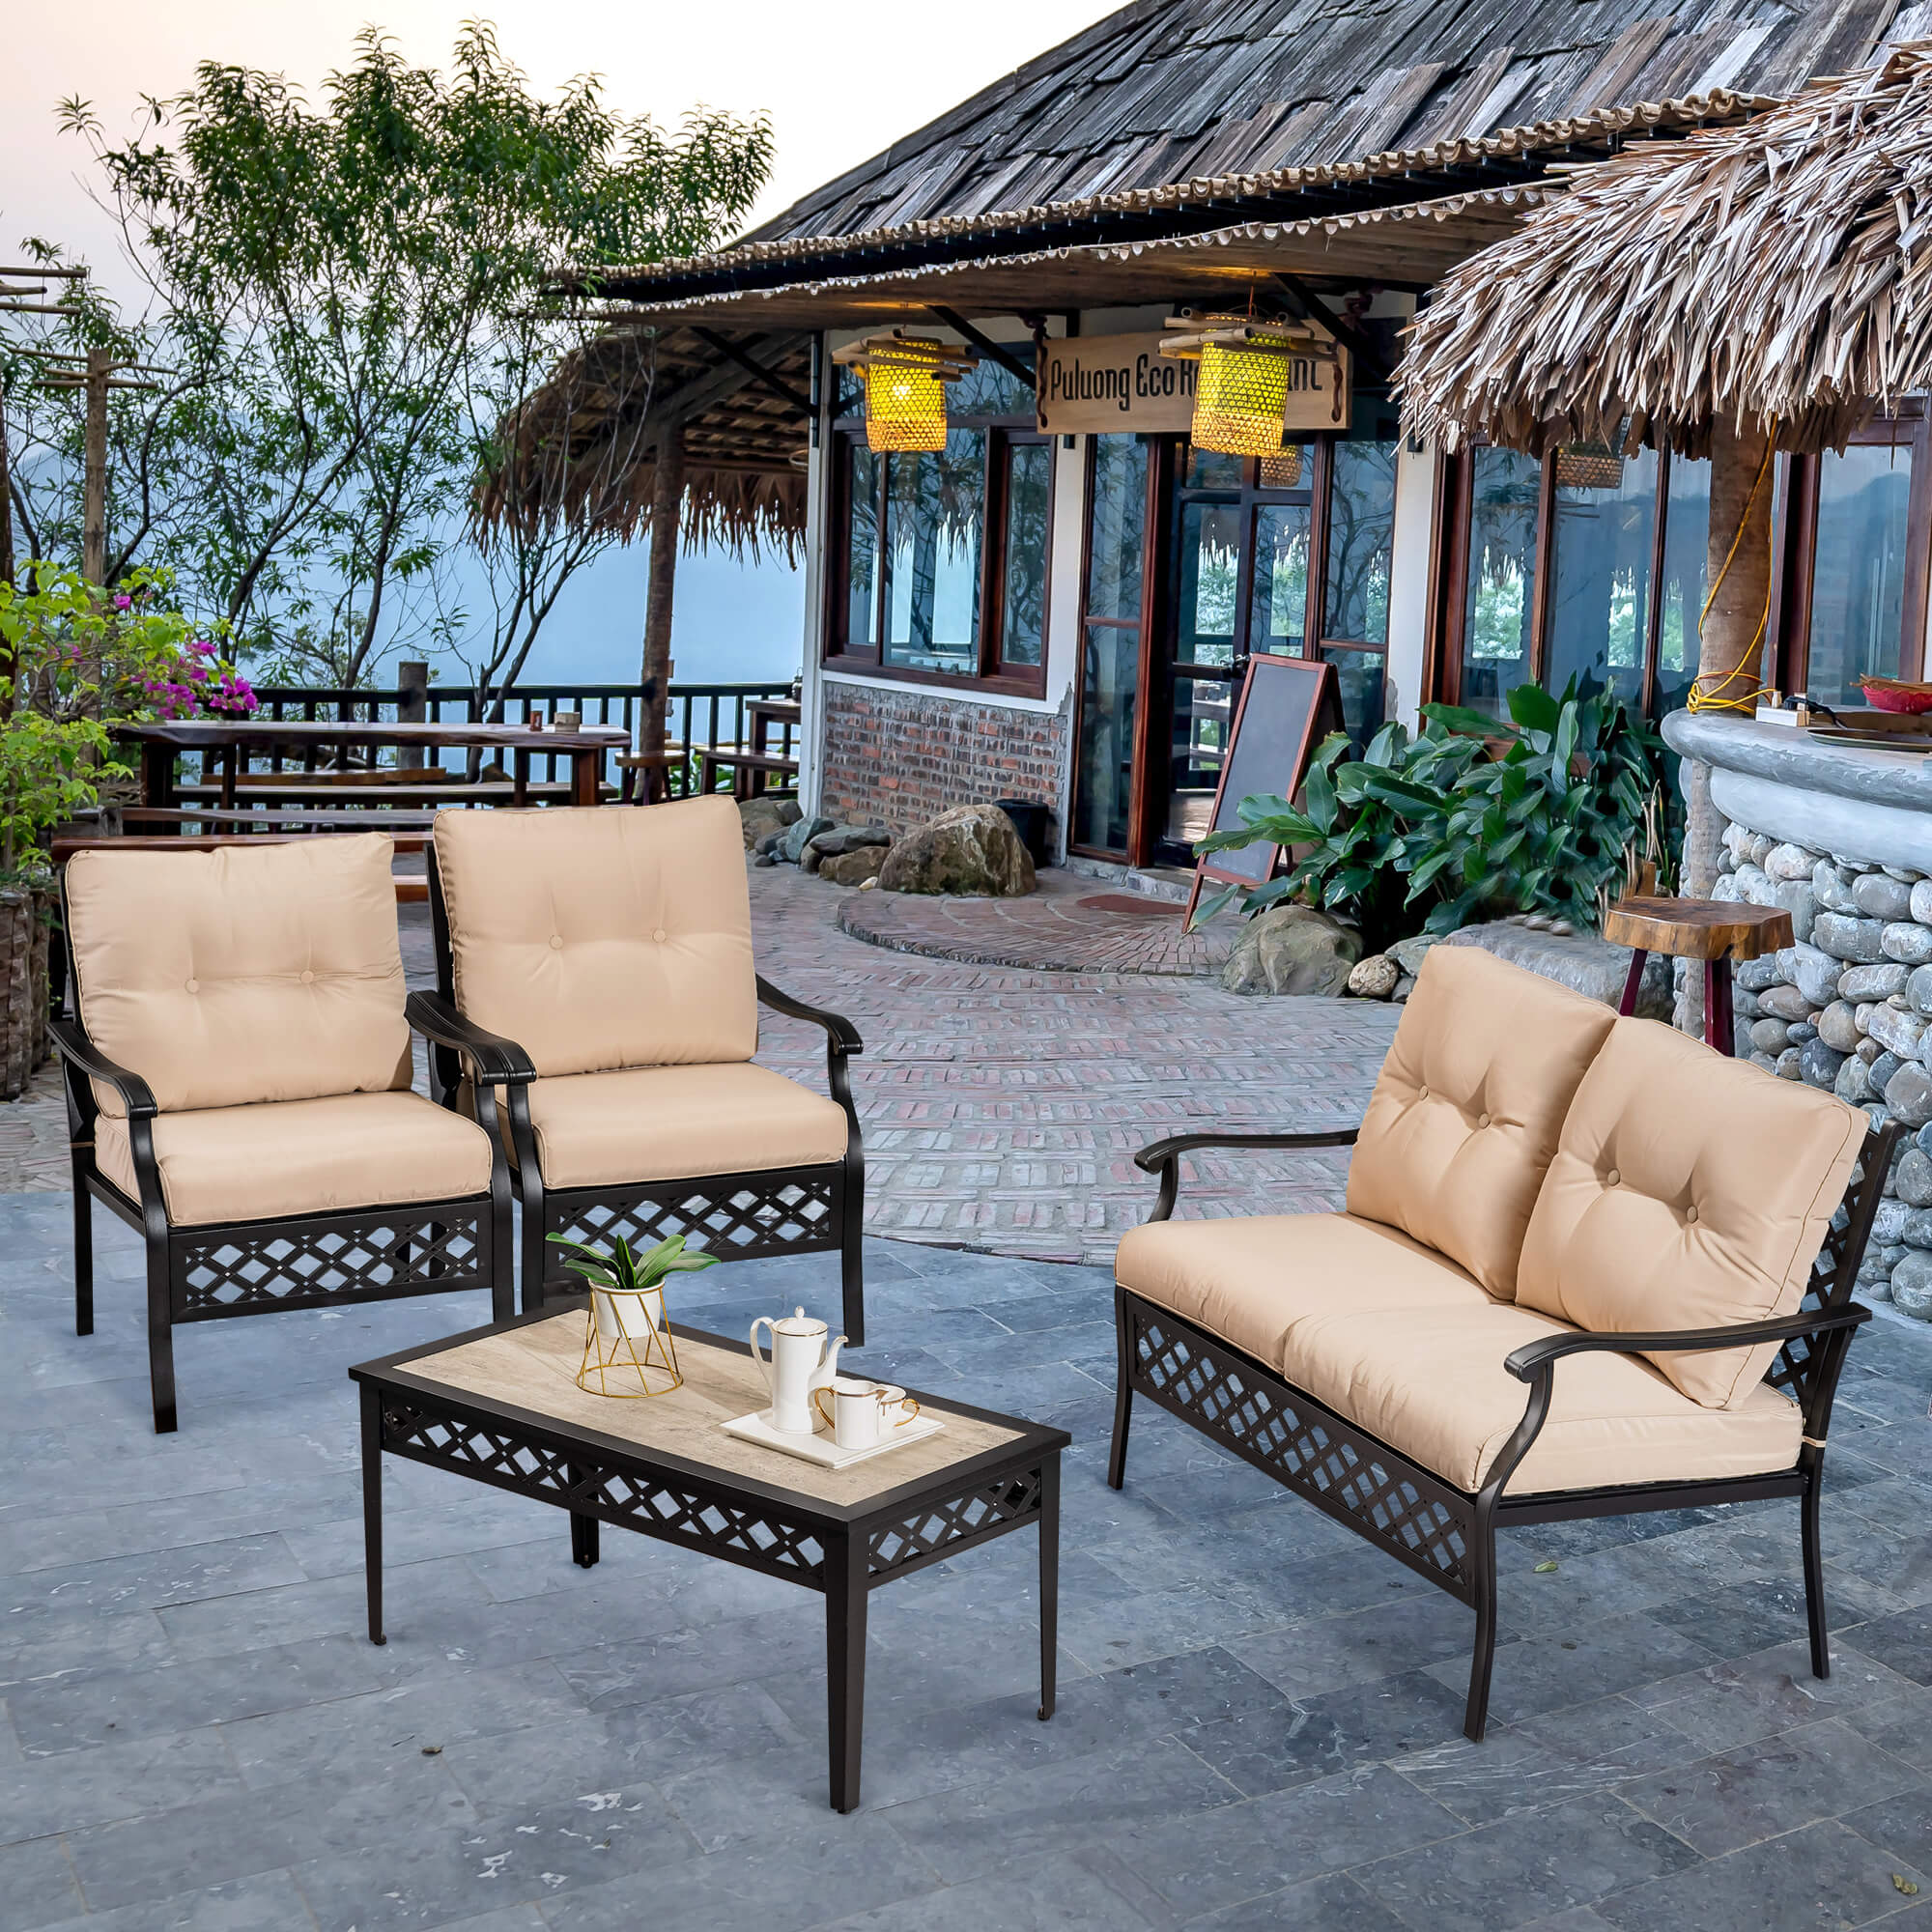 Ivinta 4 Pieces Patio Furniture Set Outdoor Sets for Home, Garden, Patio, Lawn, Poolside